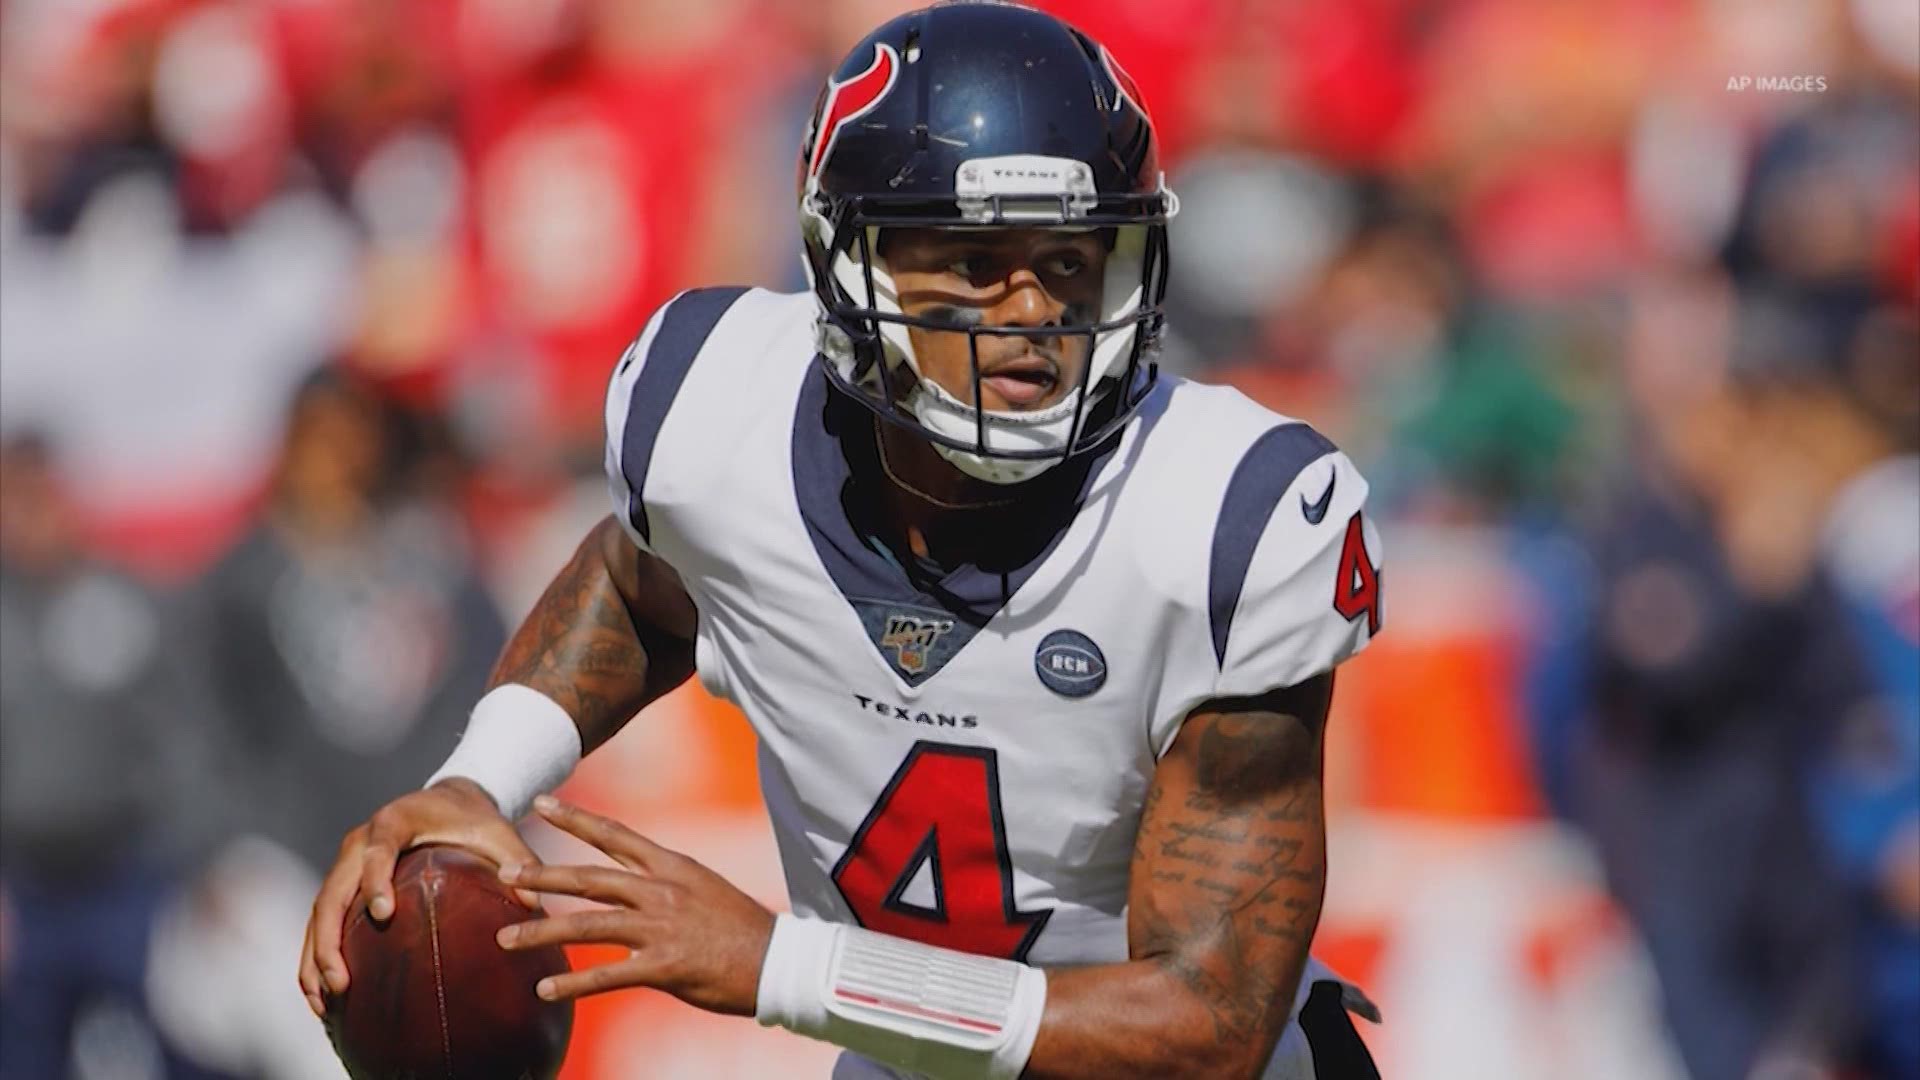 Houston Texans quarterback Deshaun Watson has officially requested a trade from the team, according to NFL.com and ESPN's Adam Schefter.